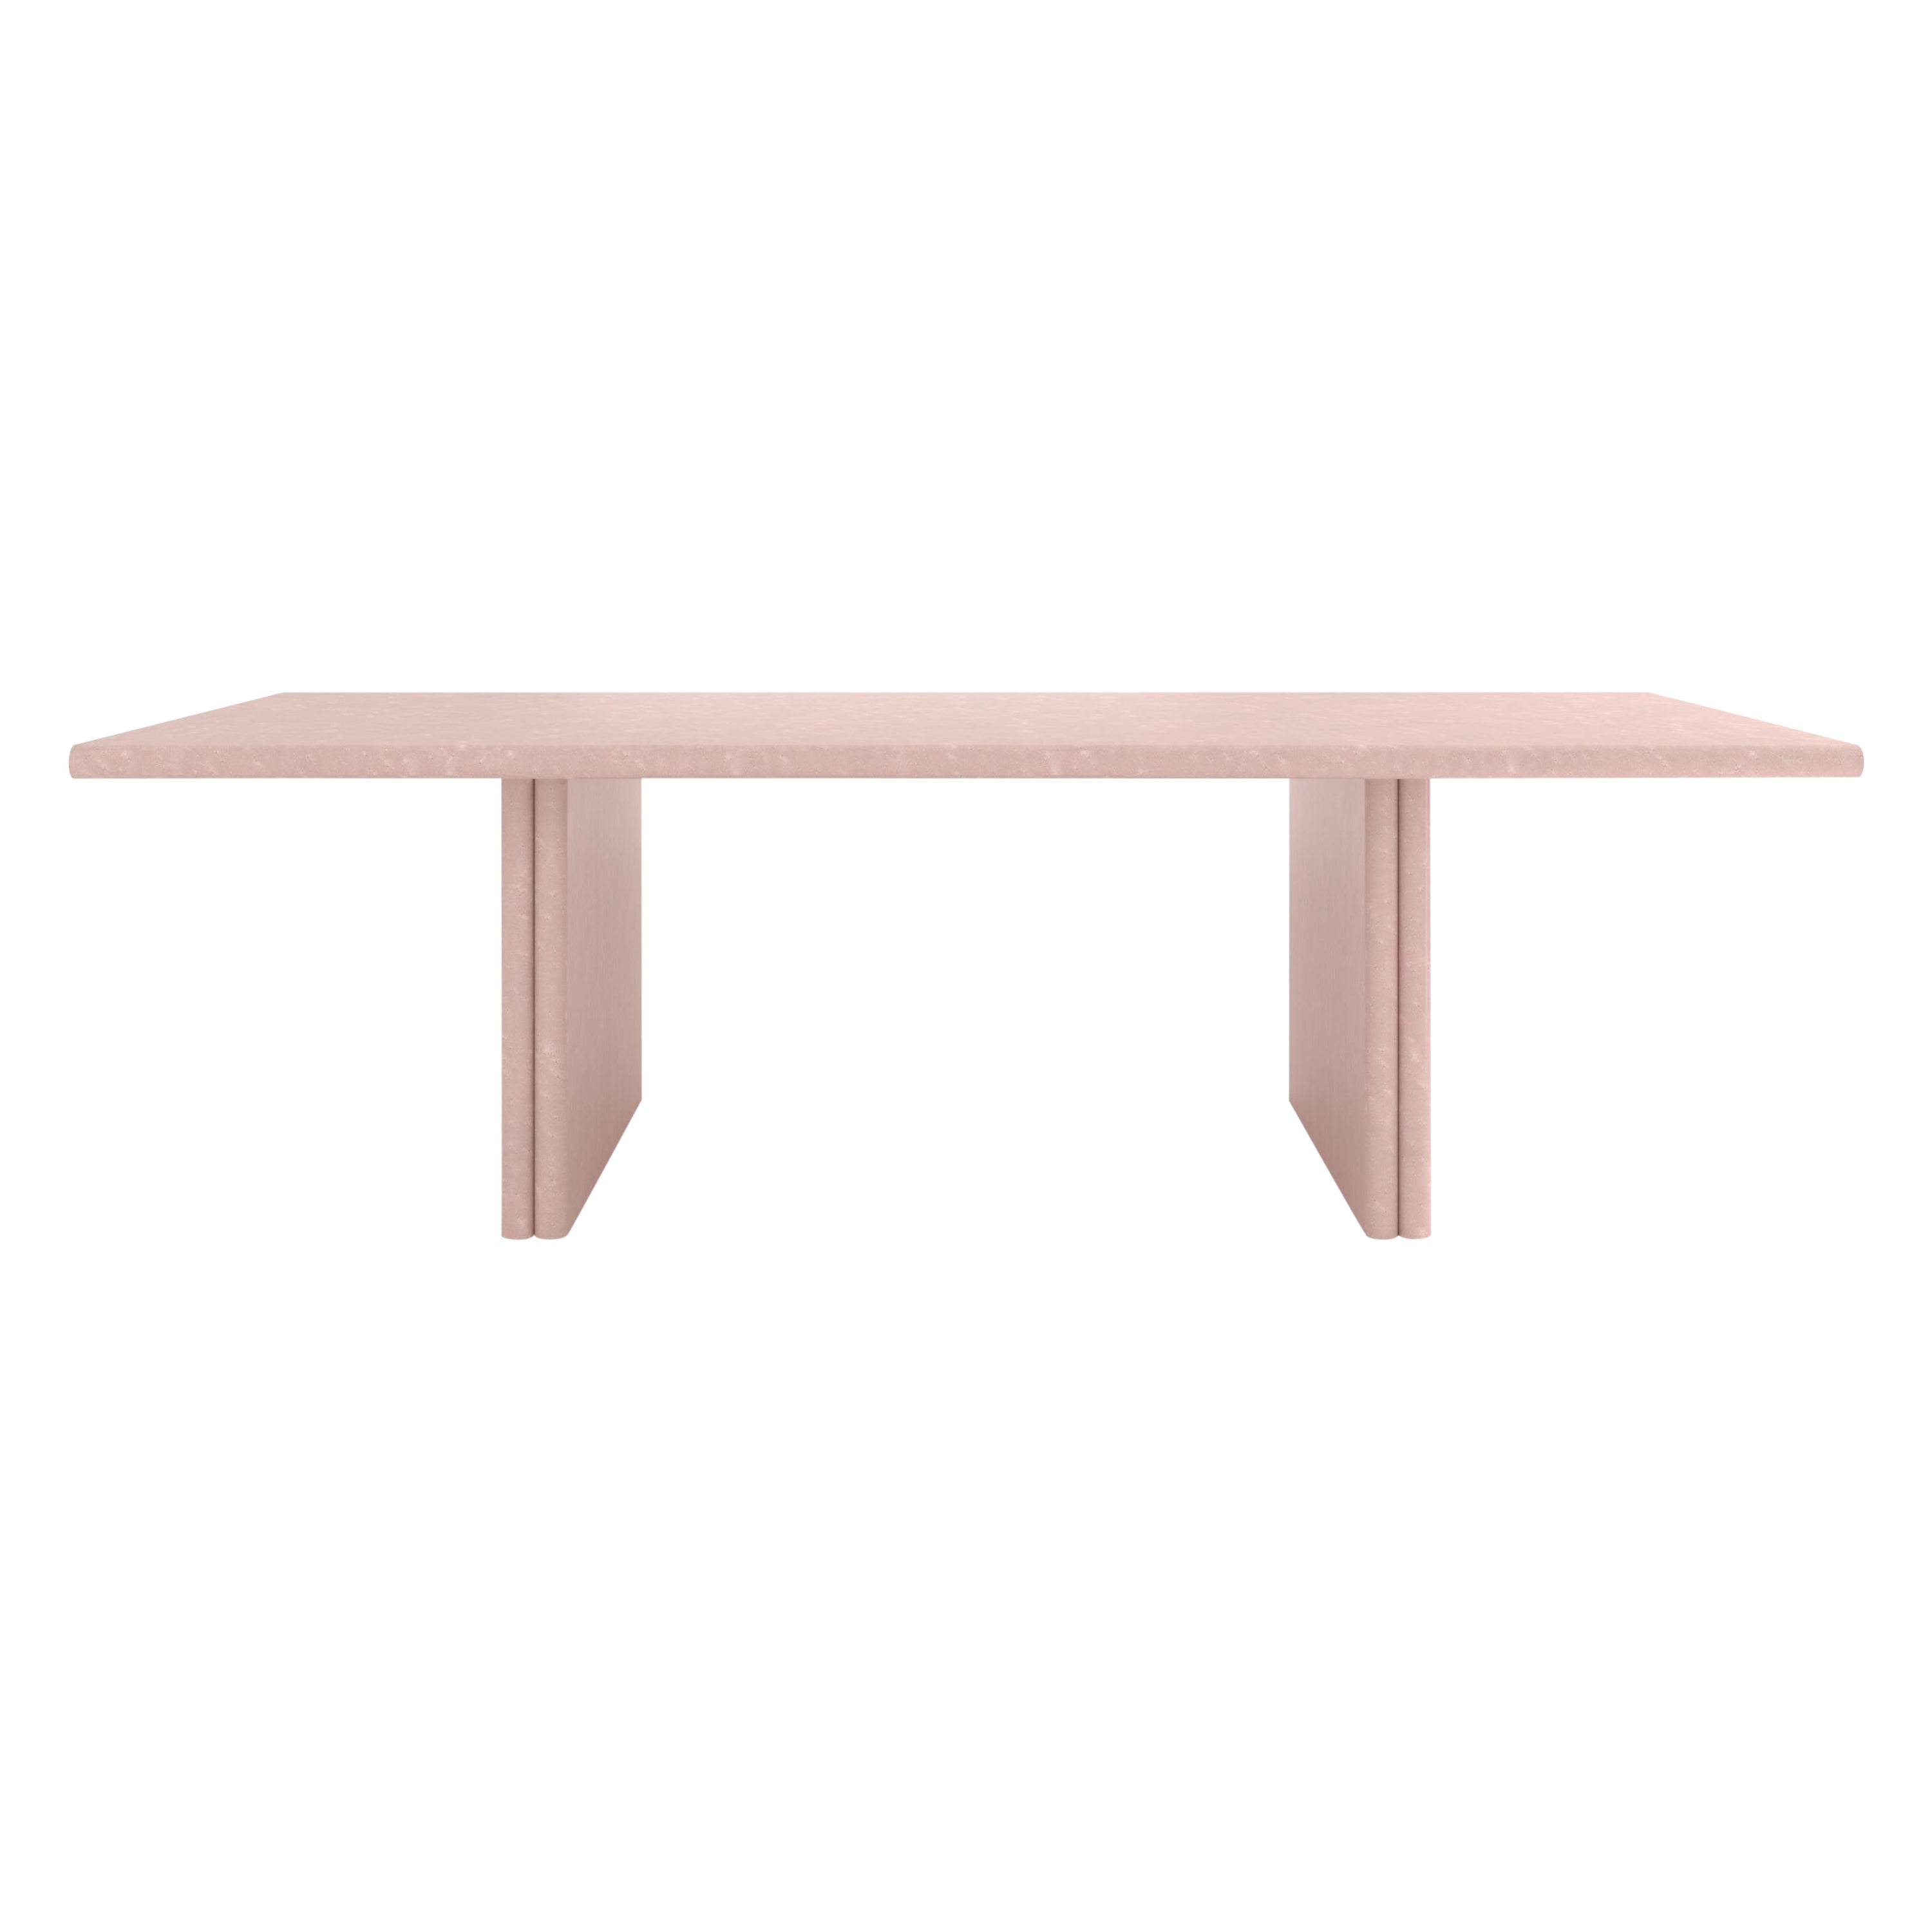 Jacques Pastel Pink Dining Table in Bird's Eye Maple by Fred&Juul